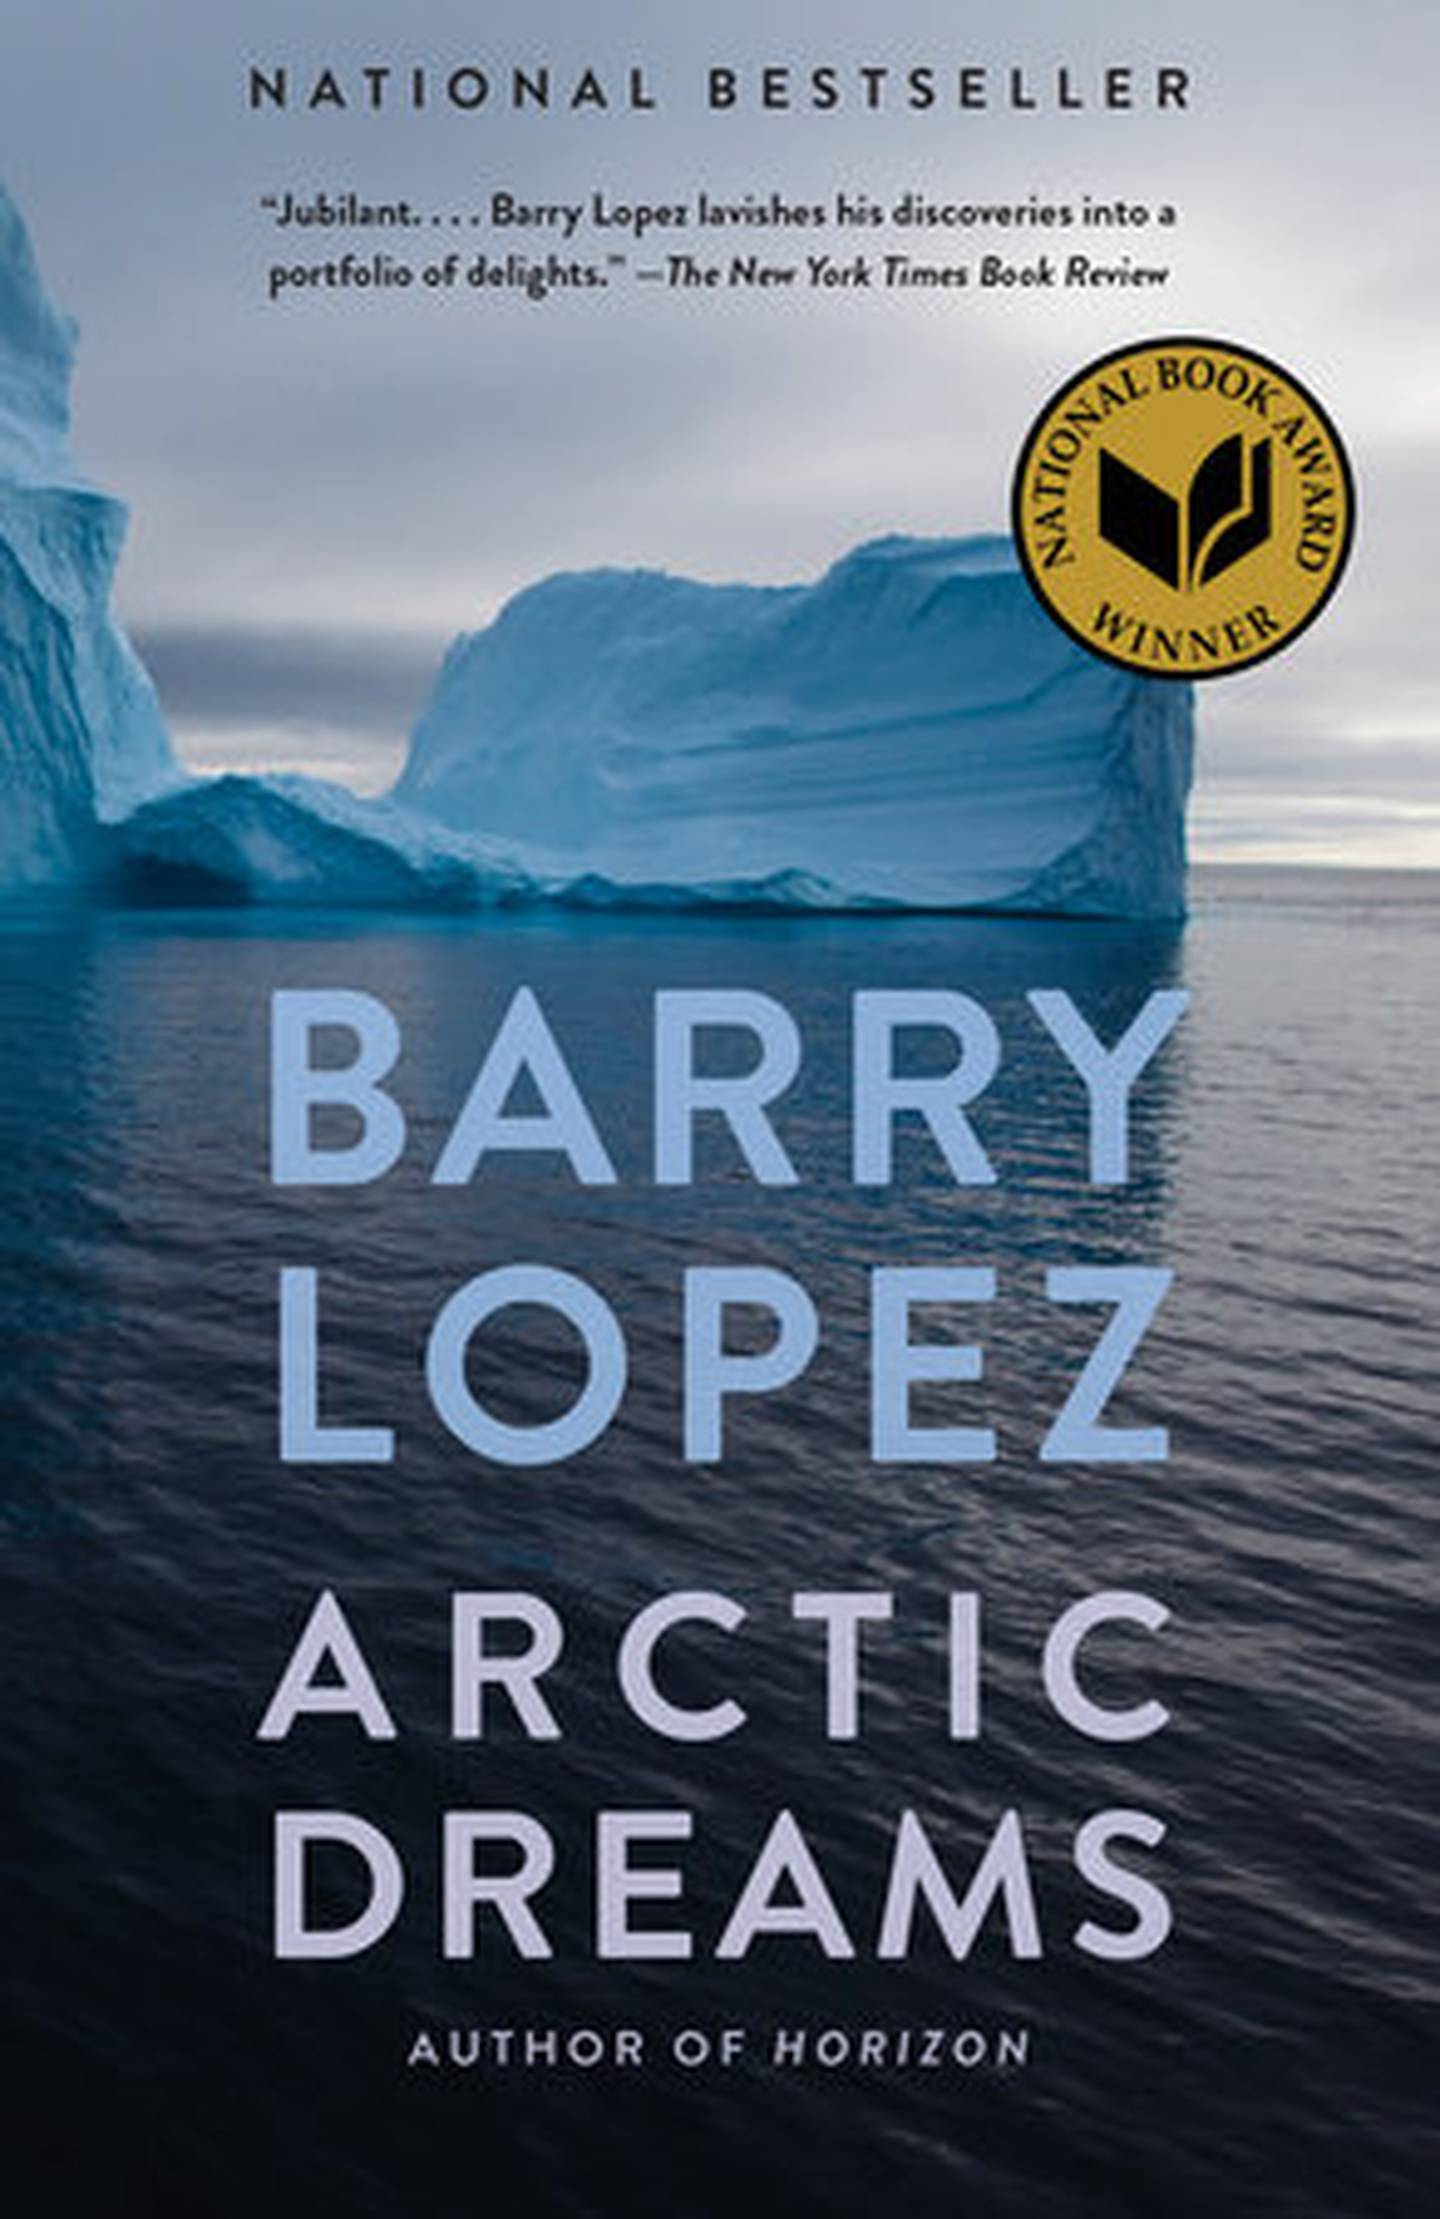 “Arctic Dreams: Imagination and Desire in a Northern Landscape,” by Barry Lopez